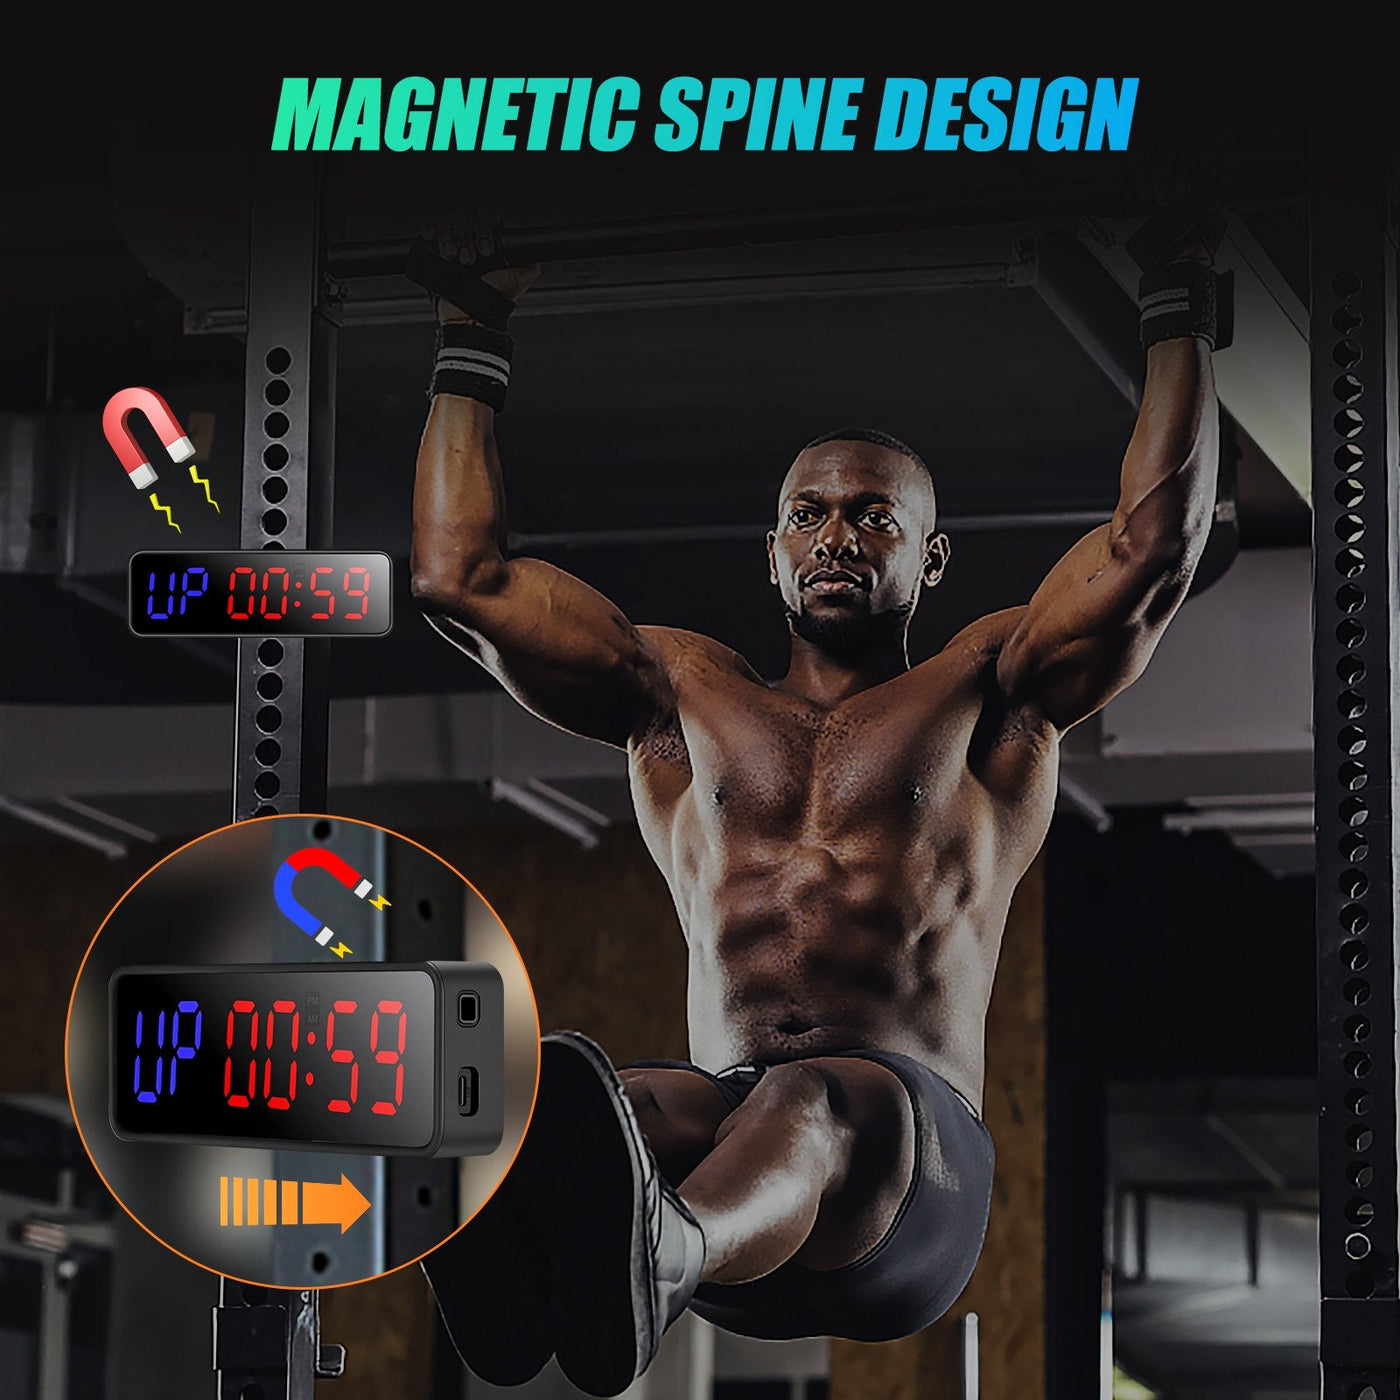 SLEVIO Portable Gym Workout Timer, Fitness Clock Built-in Magnetic